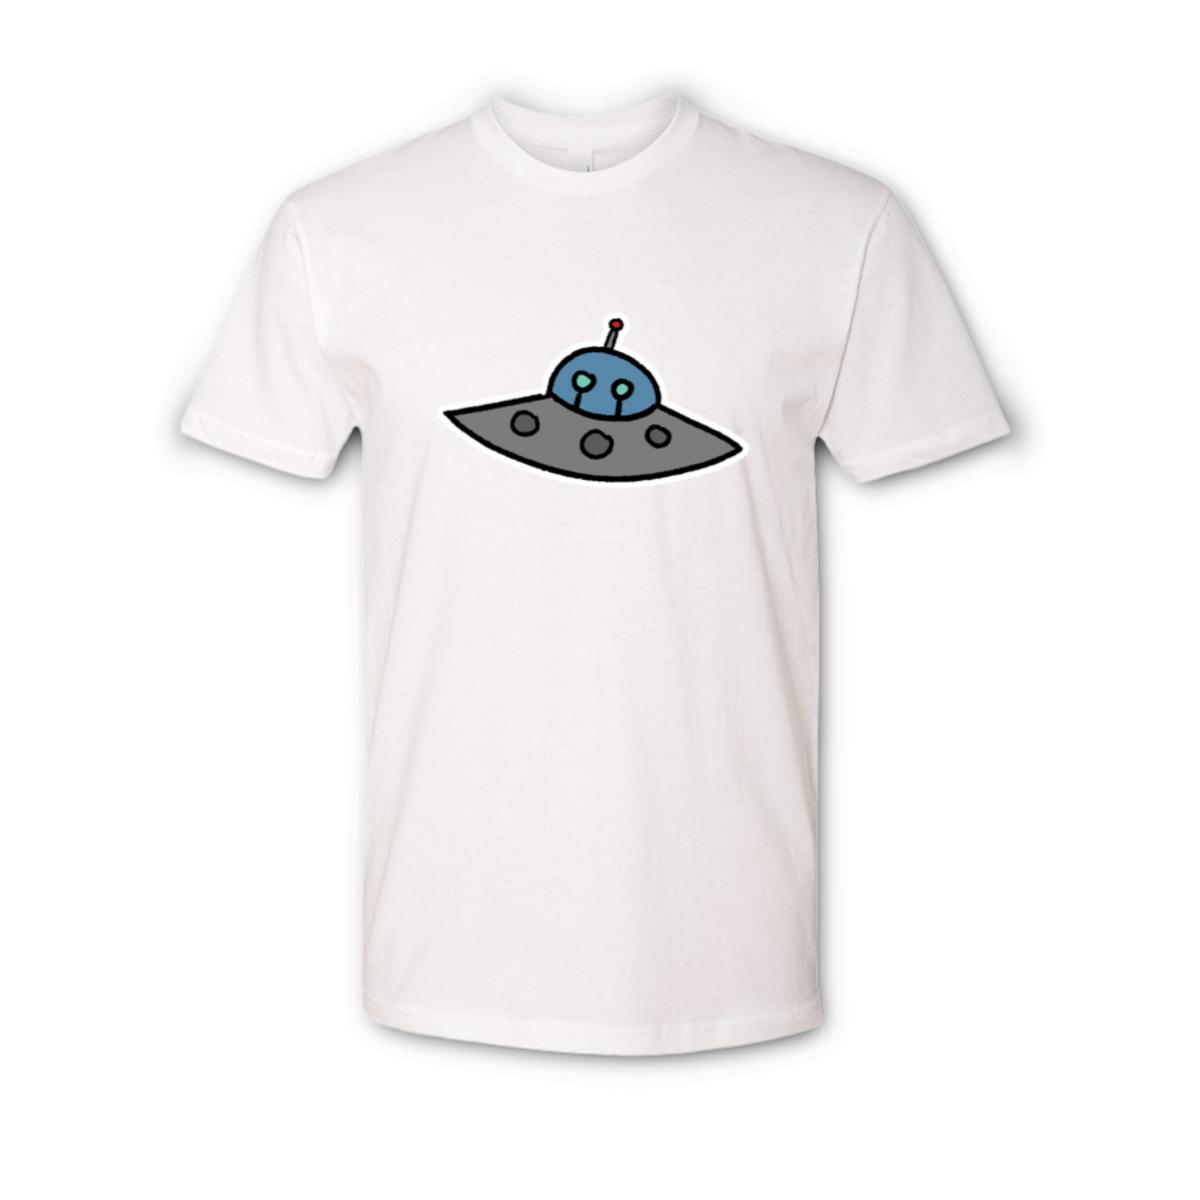 Flying Saucer Unisex Tee Small white